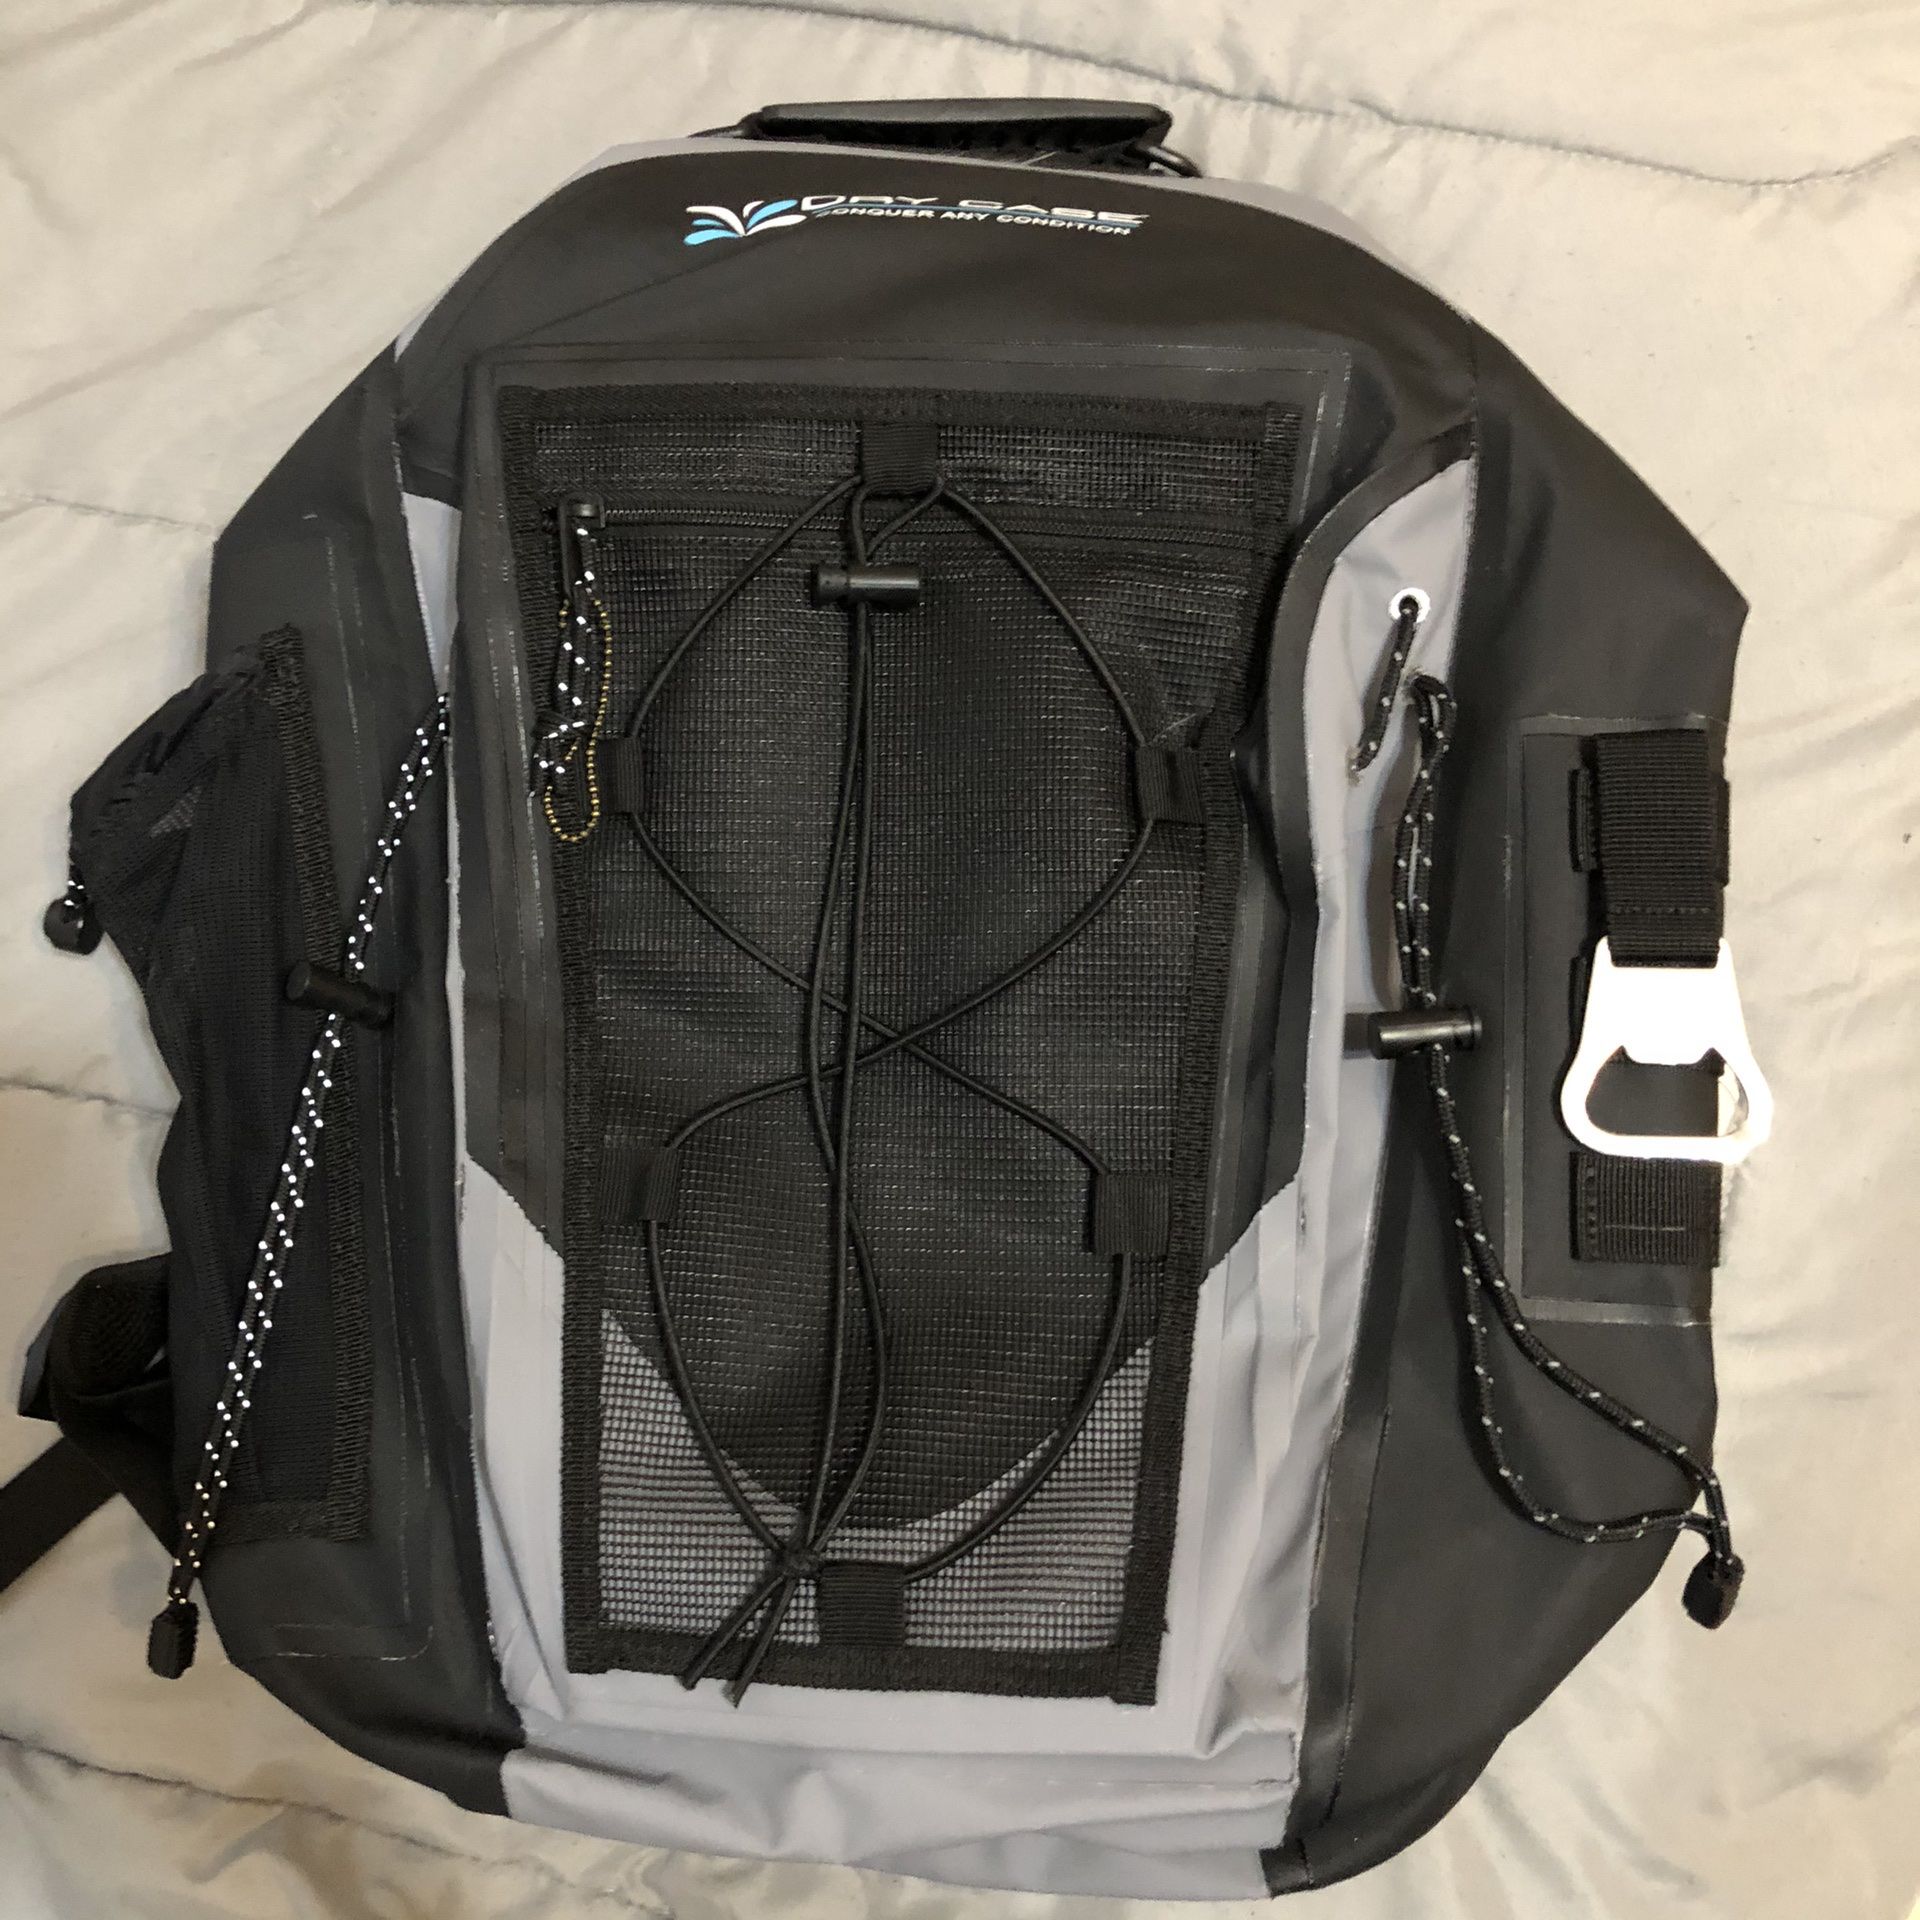 Drycase Backpack 100 Percent Waterproof New